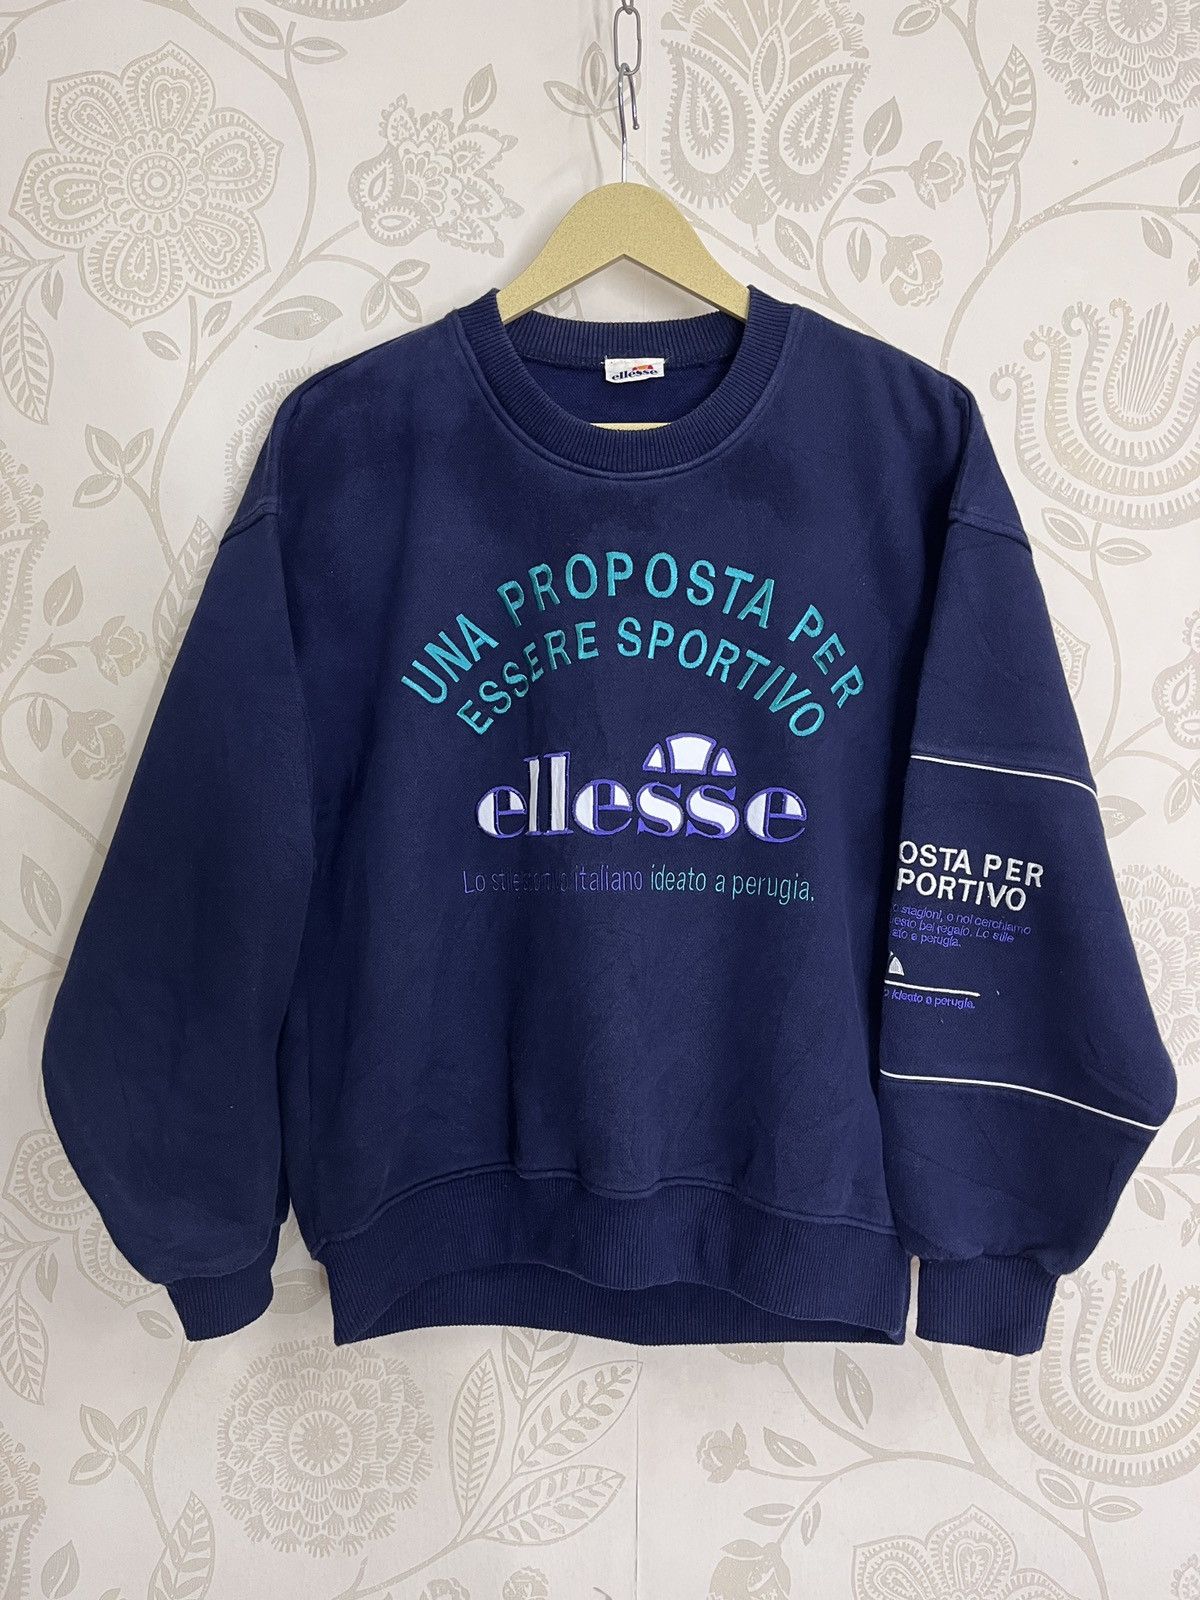 Iconic Ellesse Sweater Big Logo Embroidery Vintage 80s - 17